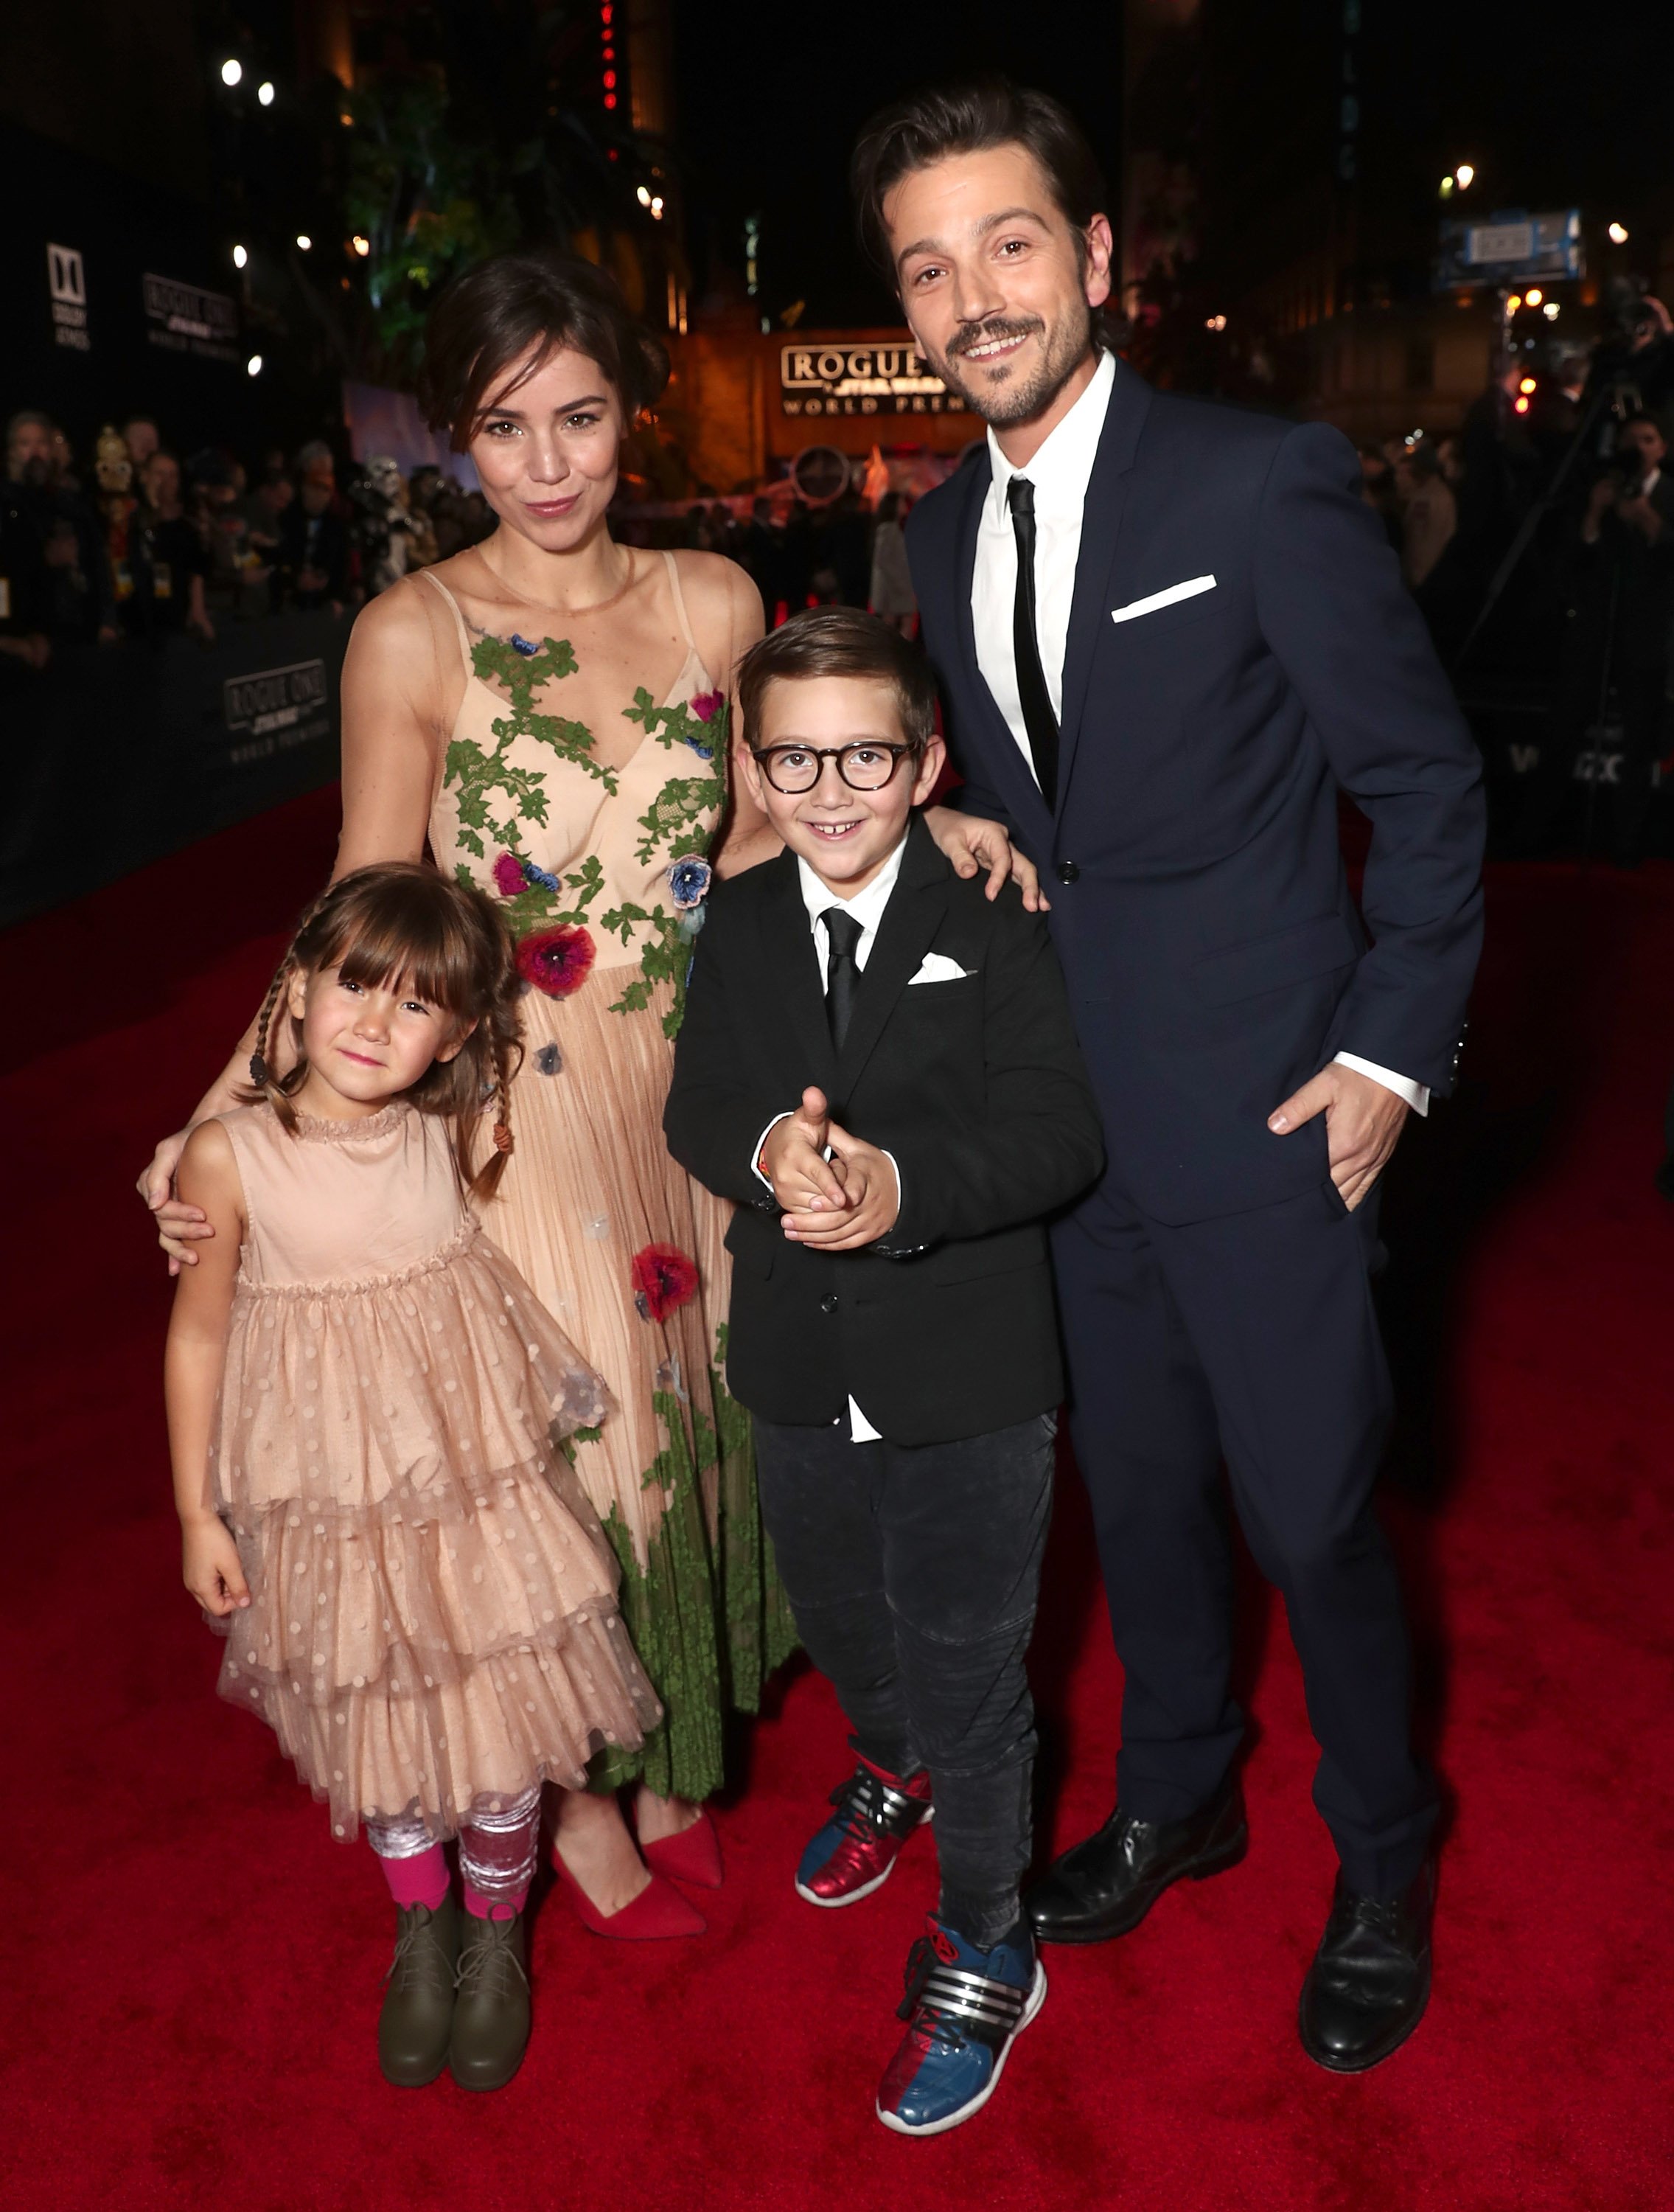 Diego Luna, Camila Sodi, and their children Jerónimo and Fiona at the premiere of "Rogue One: A Star Wars Story" on December 10, 2016 | Source: Getty Images